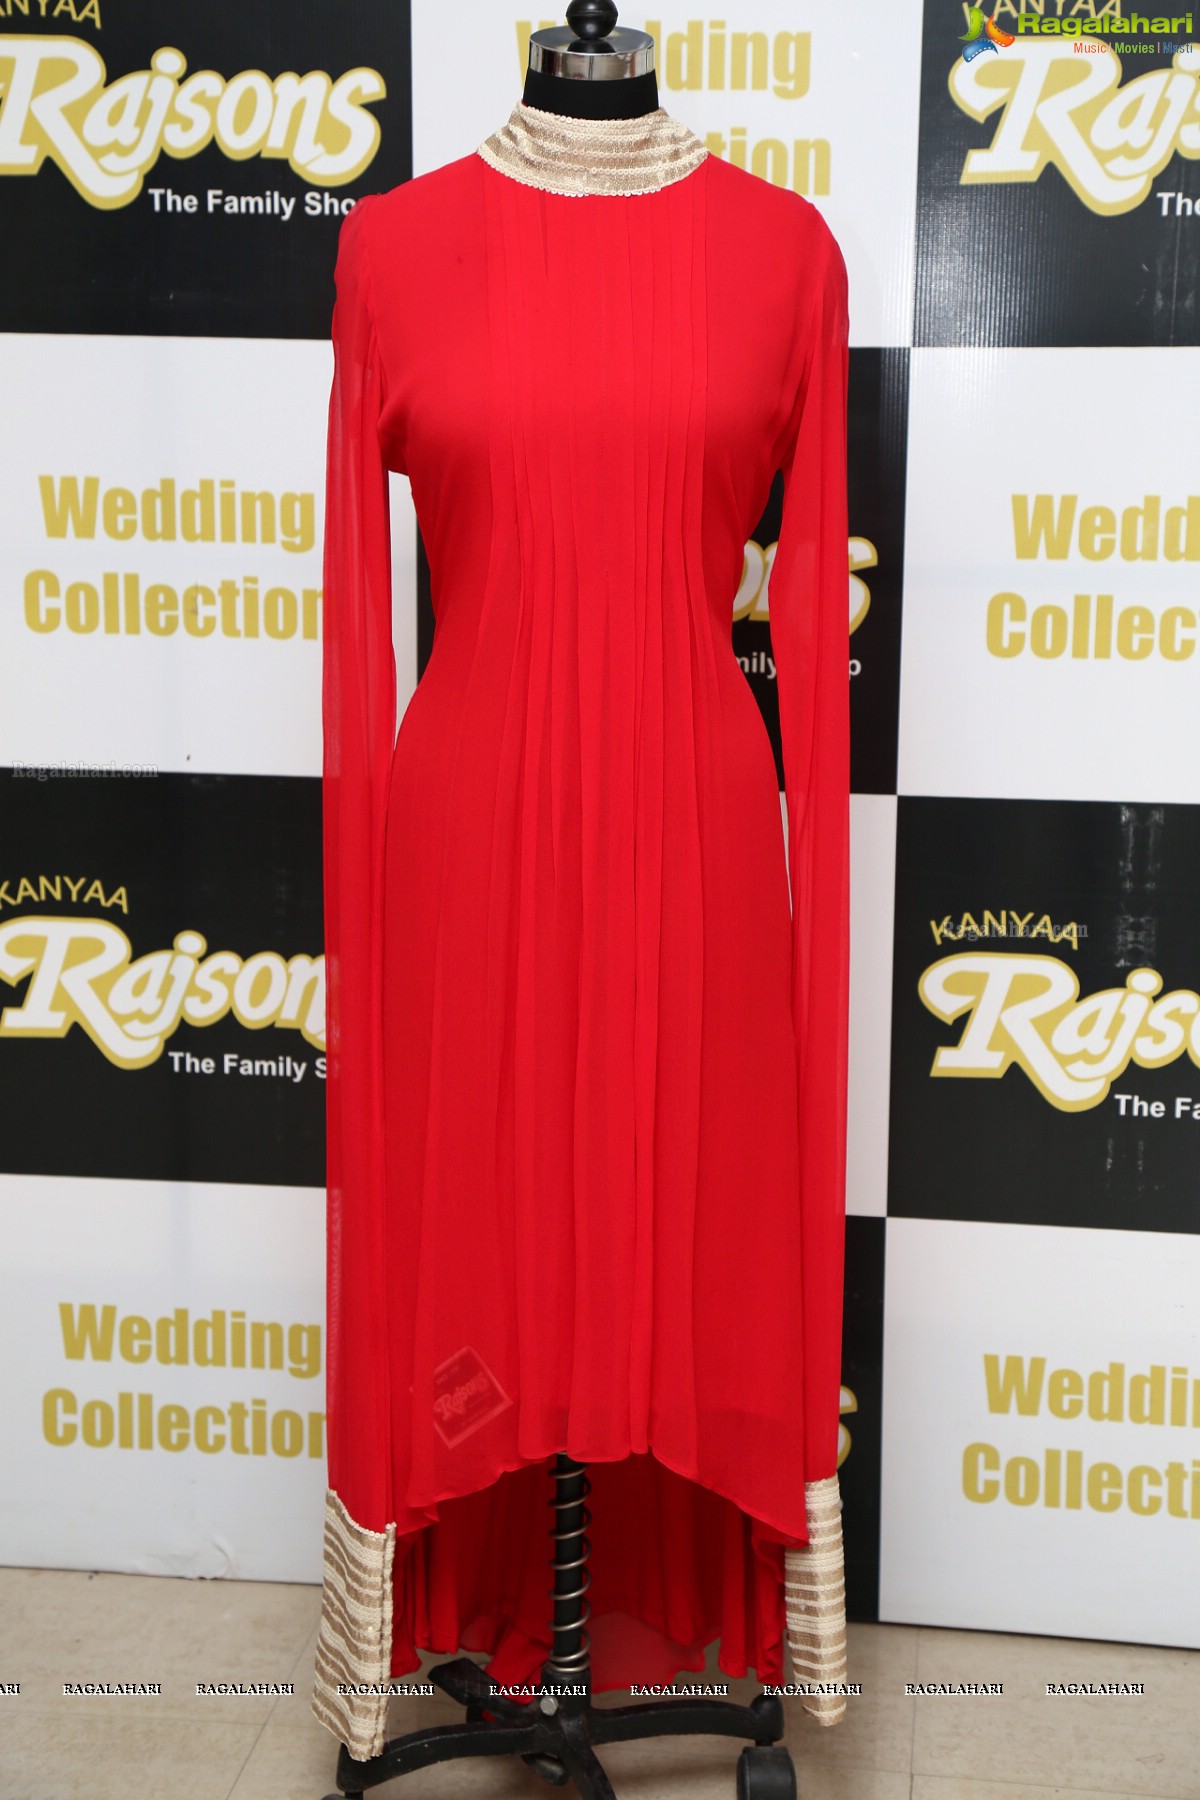 Kanyaa Rajsons - Biggest and Hautest Fashion Hub launches Wide Collection in Hyderabad